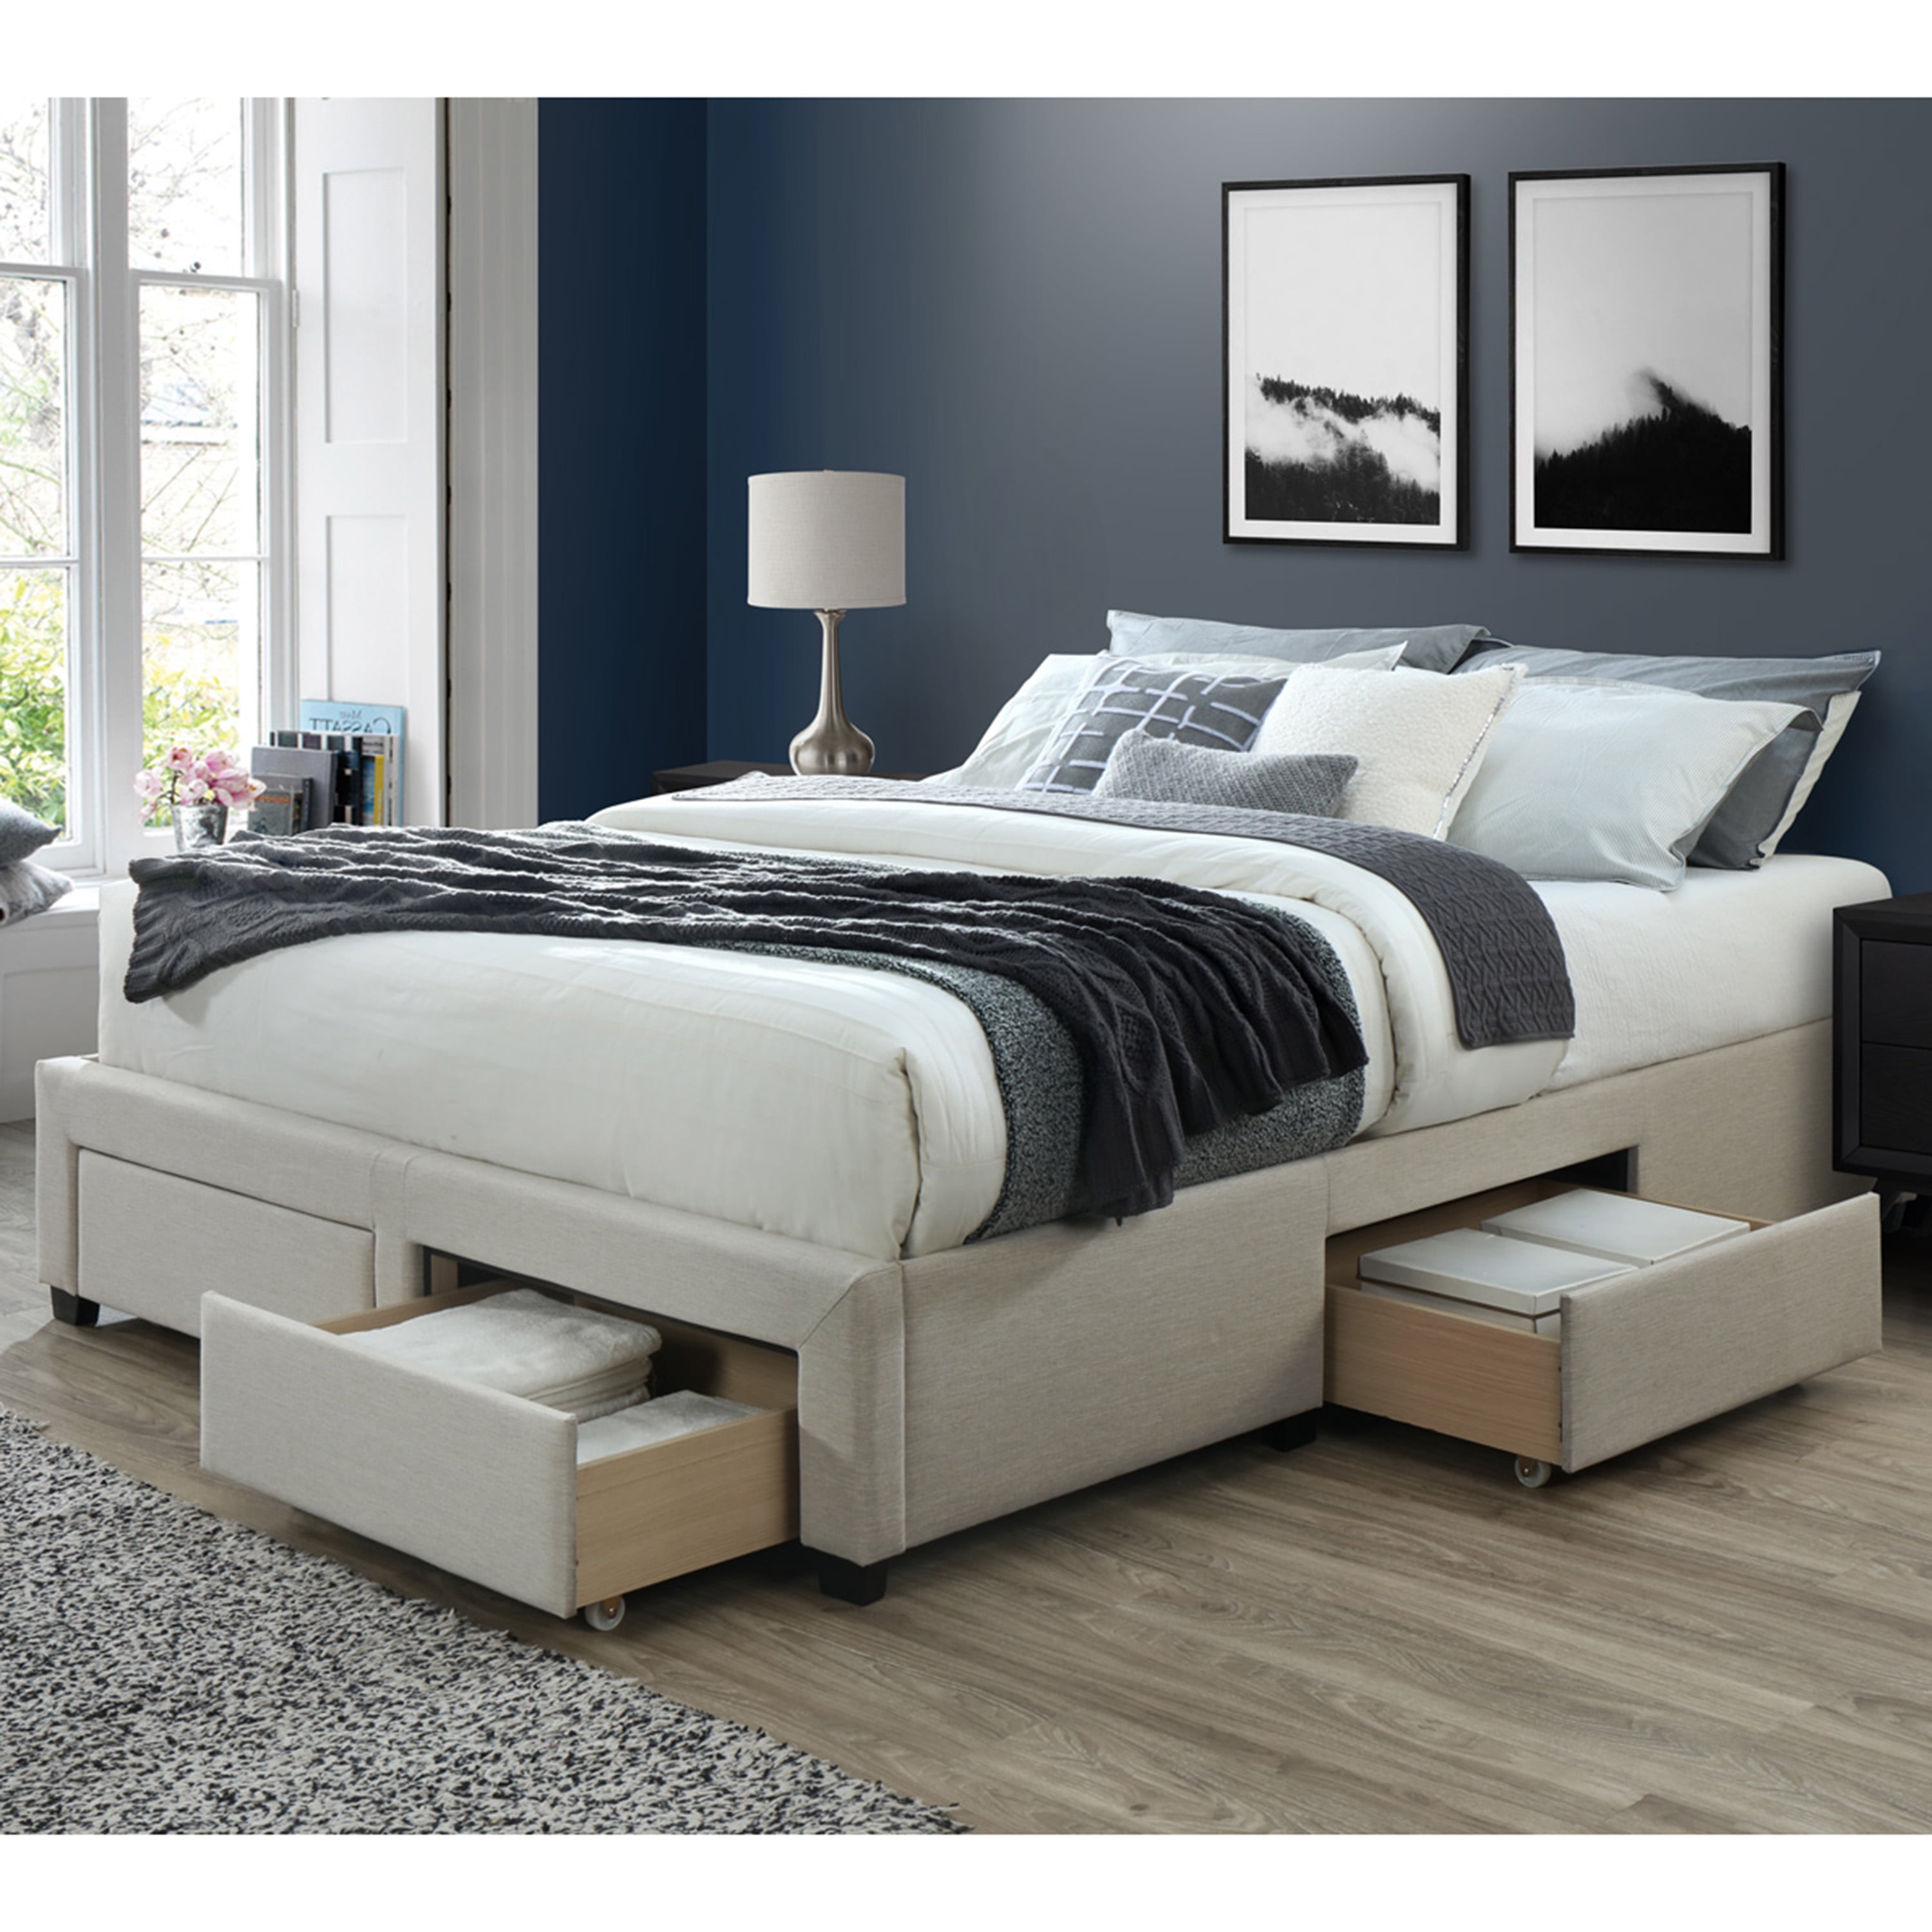 Buy Dg Casa Cosmo Upholstered Platform Bed Frame Base With Storage Drawers Queen Size In Beige